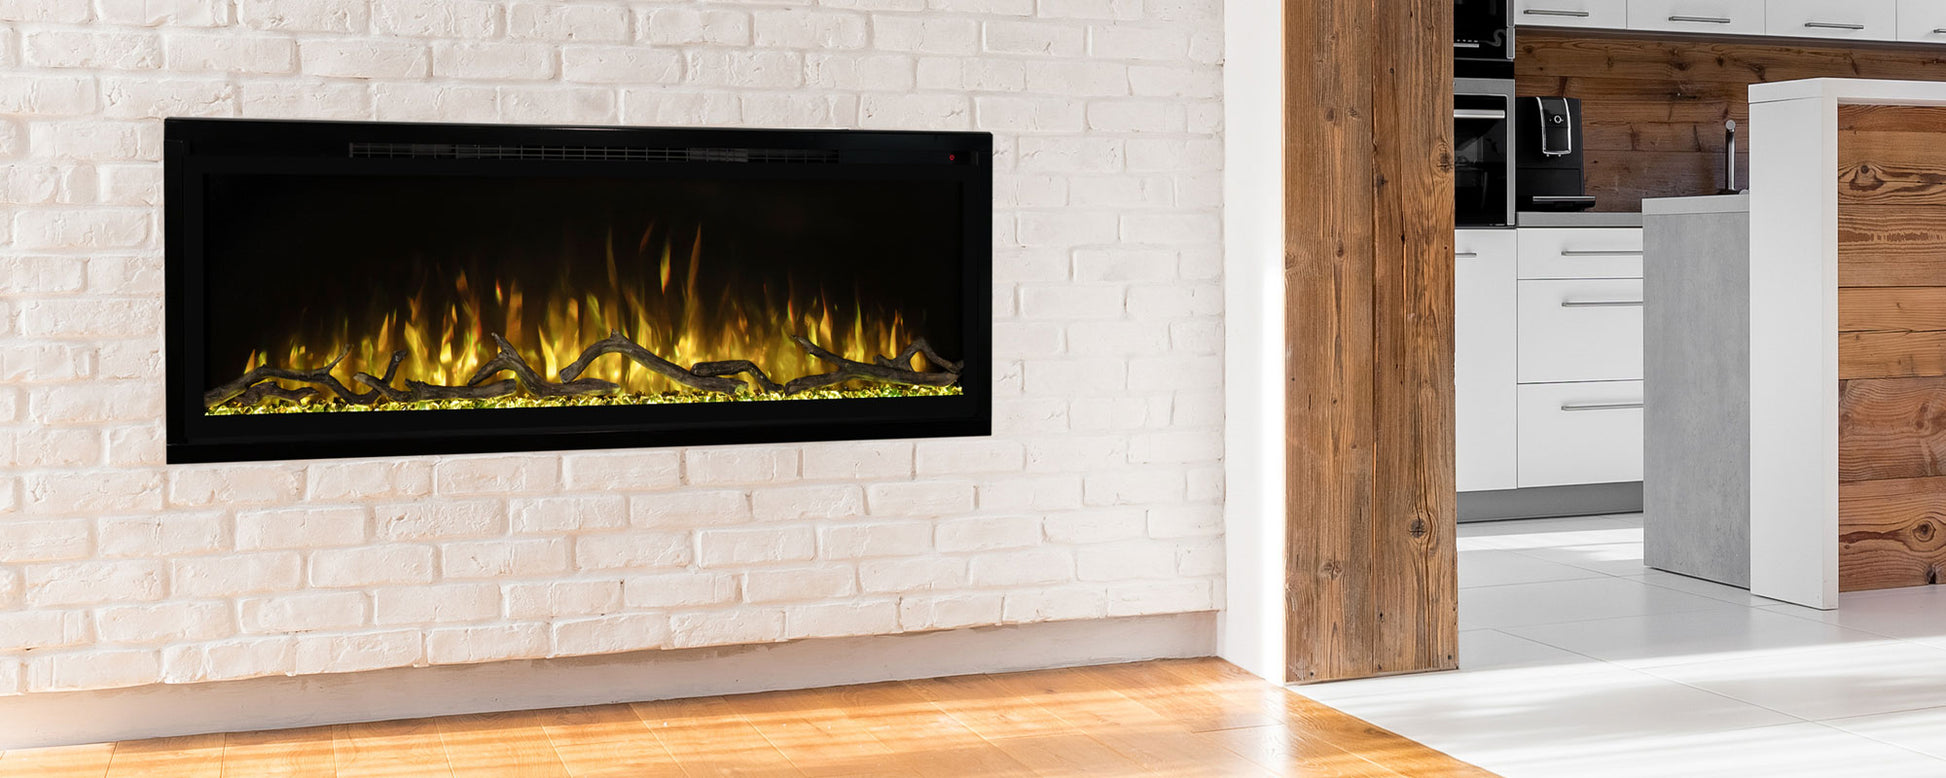 Modern Flames Slimline 74" Built-In Linear Electric Fireplace inside room - Very Good Fireplaces